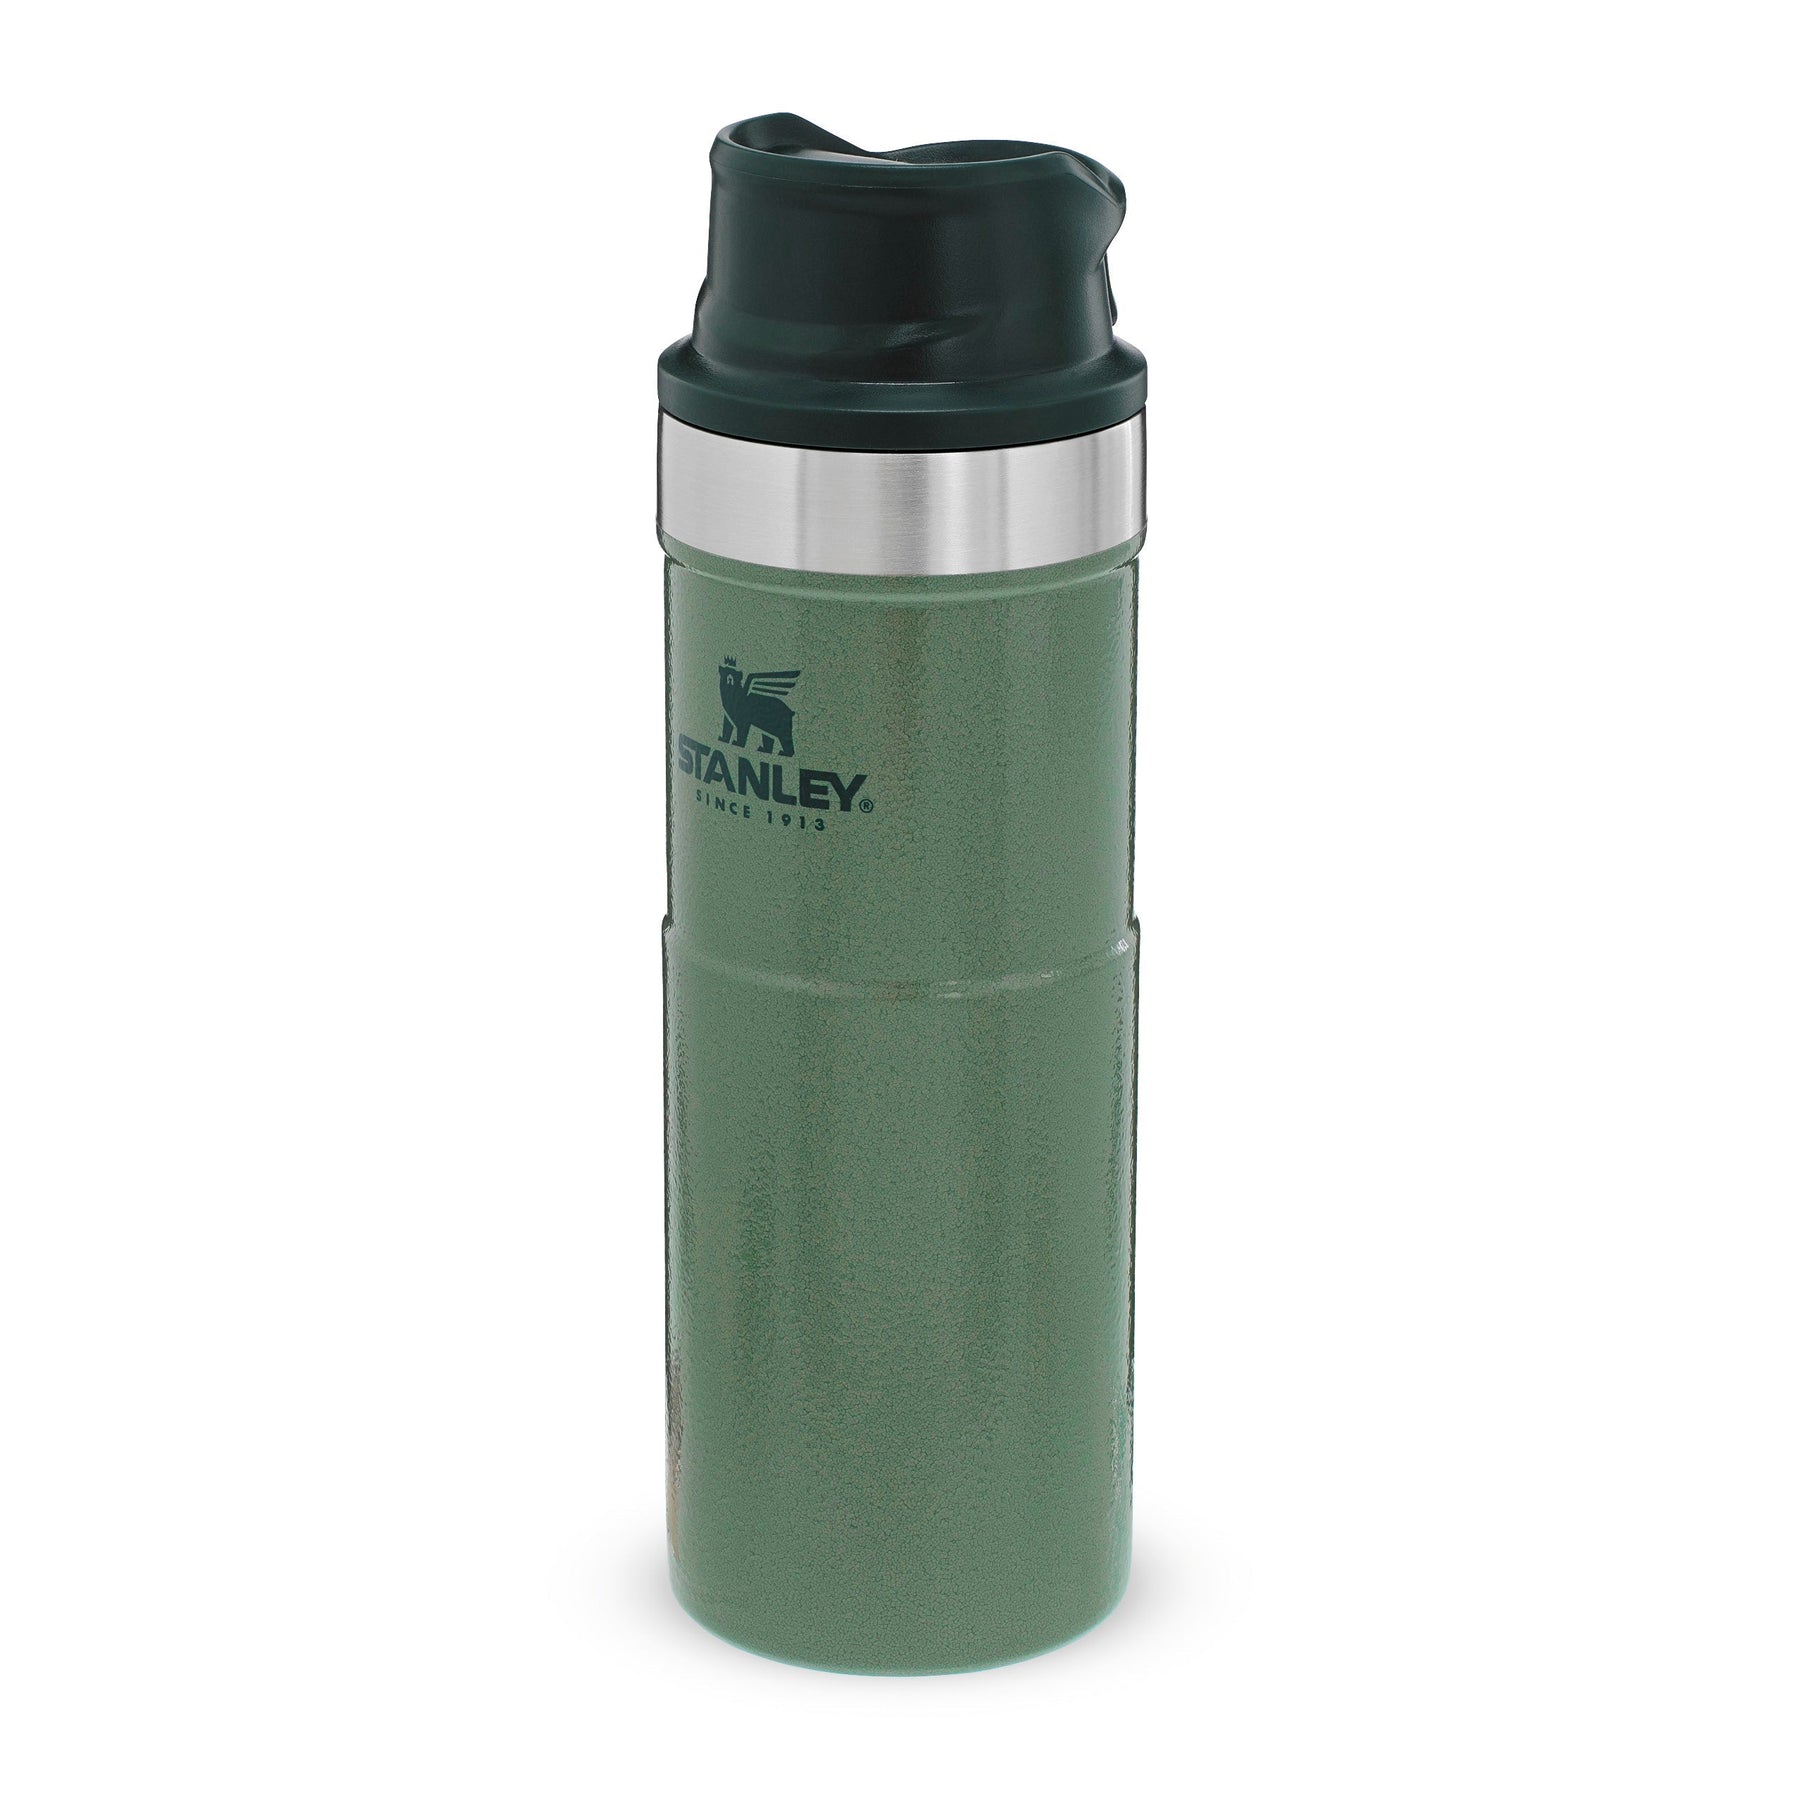 STANLEY - CLASSIC BOTTLE - SMALL 470mL / 16oz VACUUM BOTTLE HOT & COLD  THERMOS